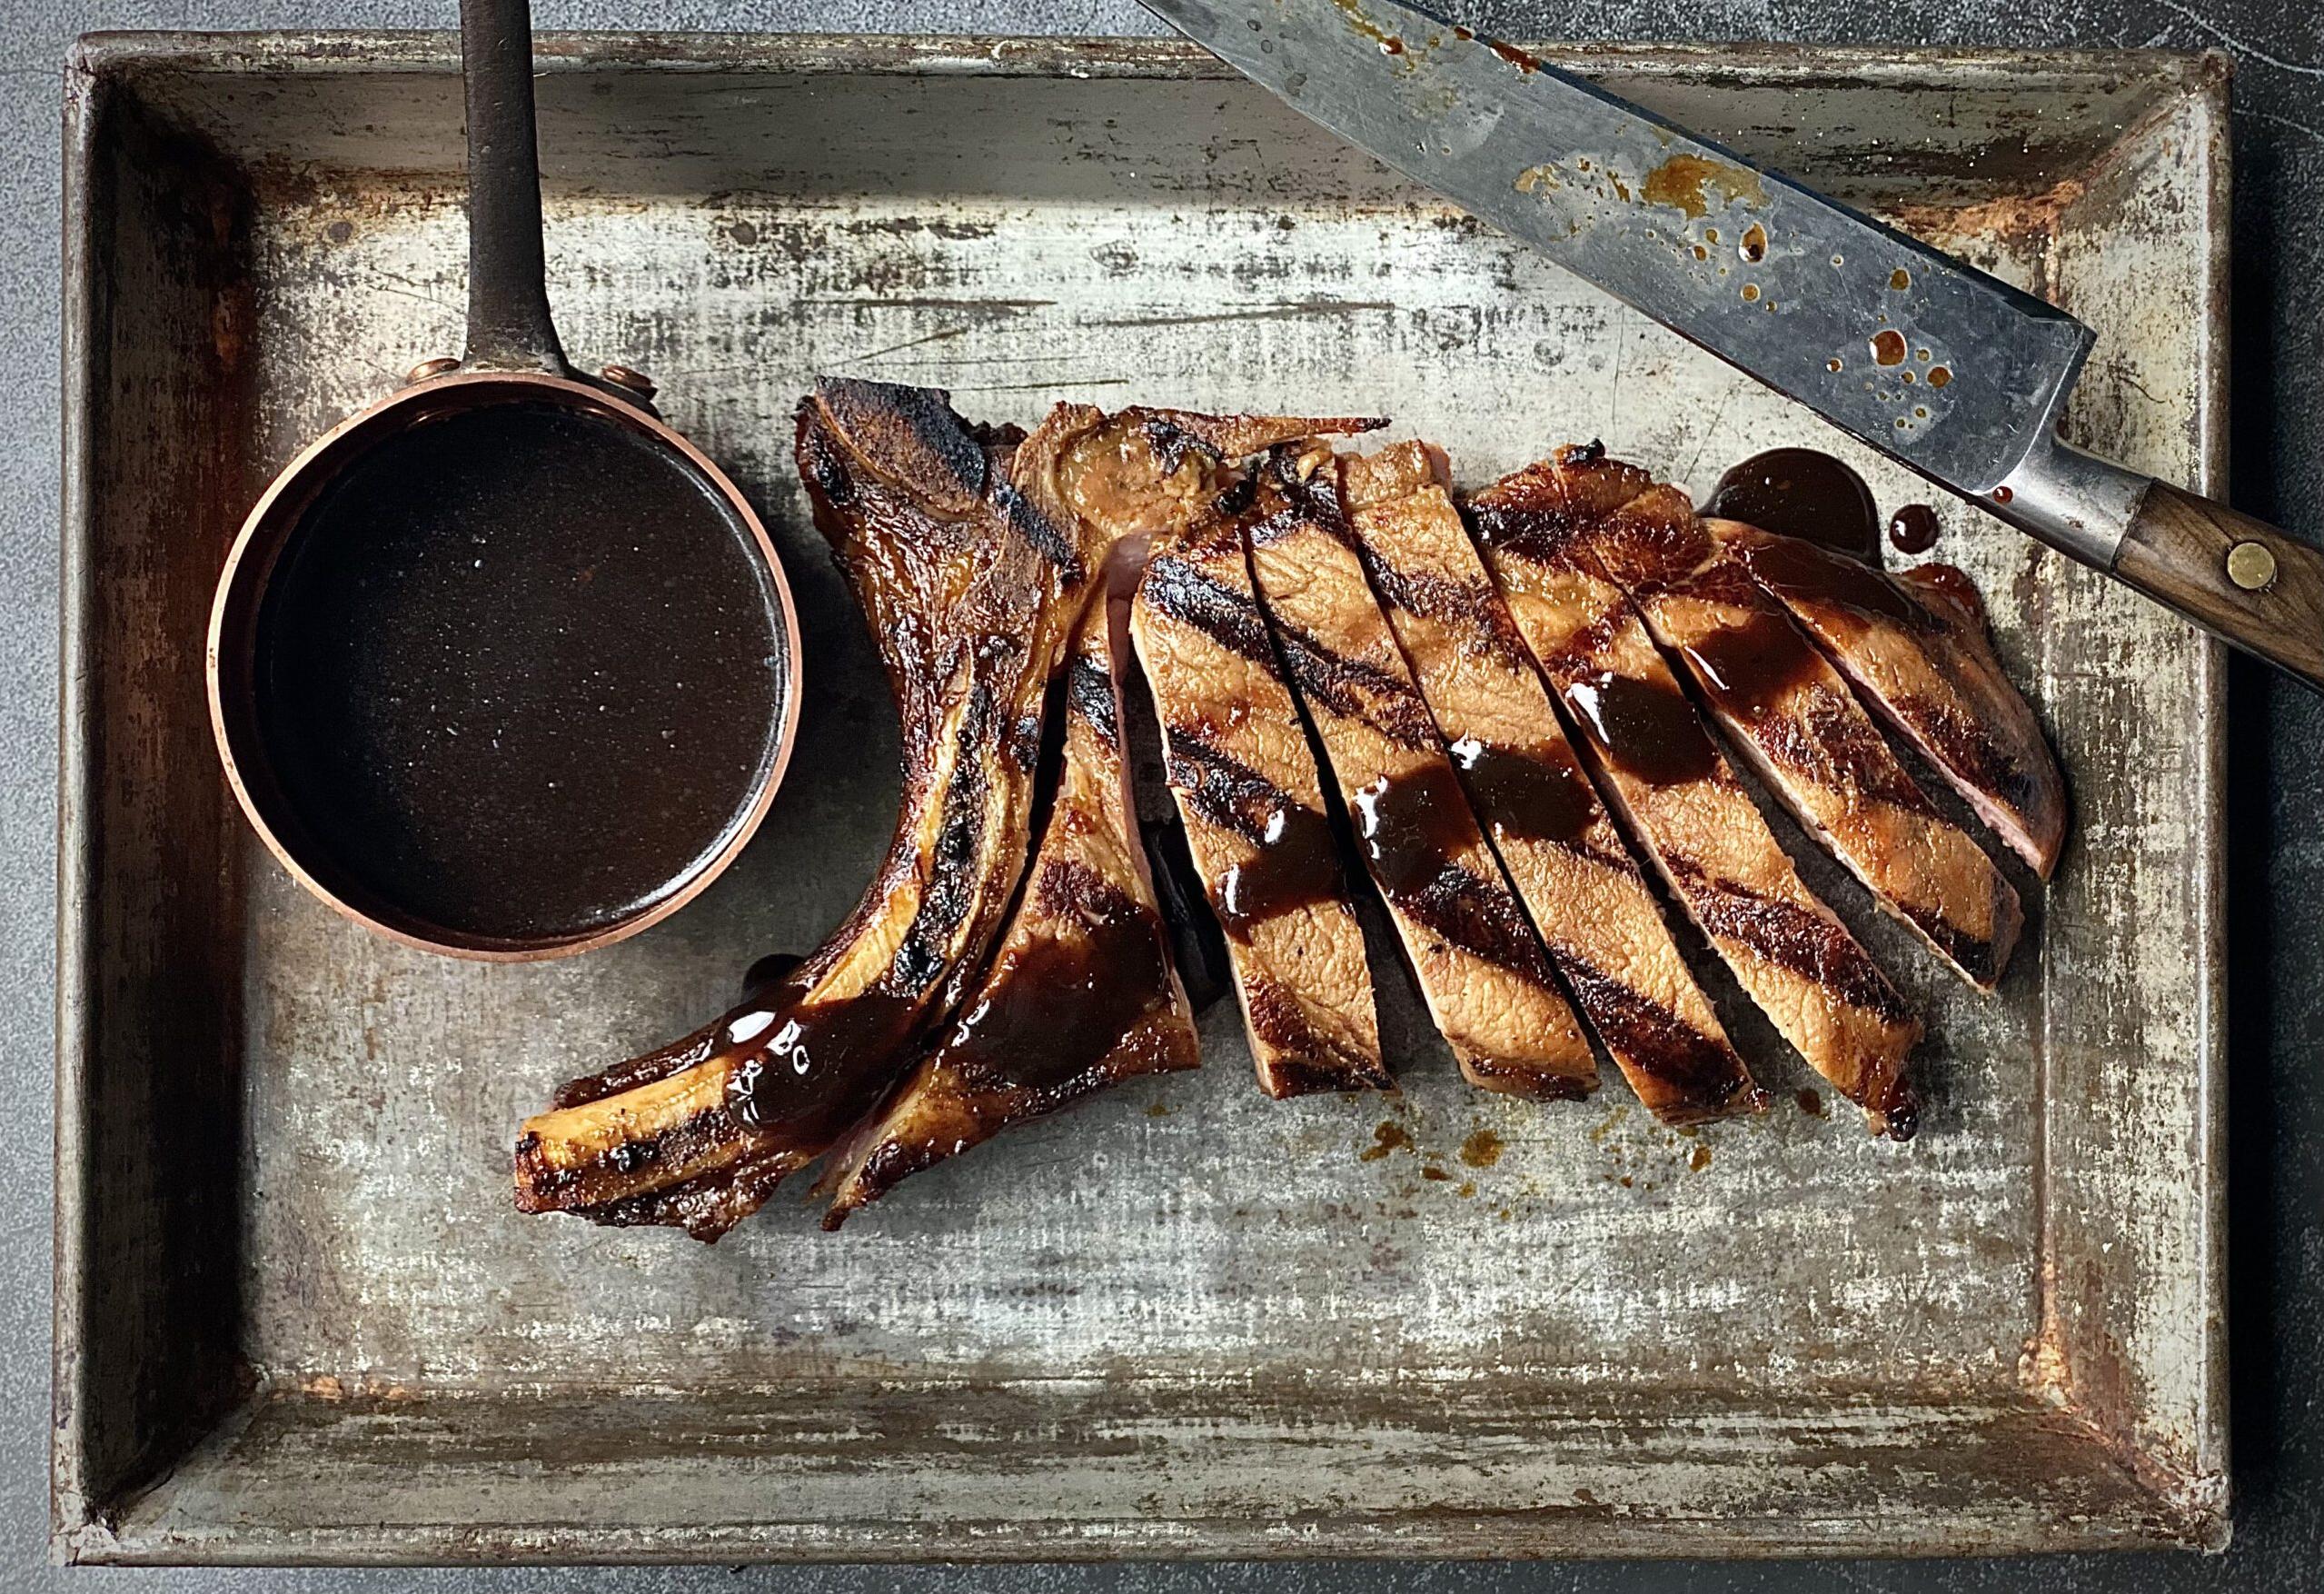  Dive into the irresistible taste of molasses coffee marinated pork chops!